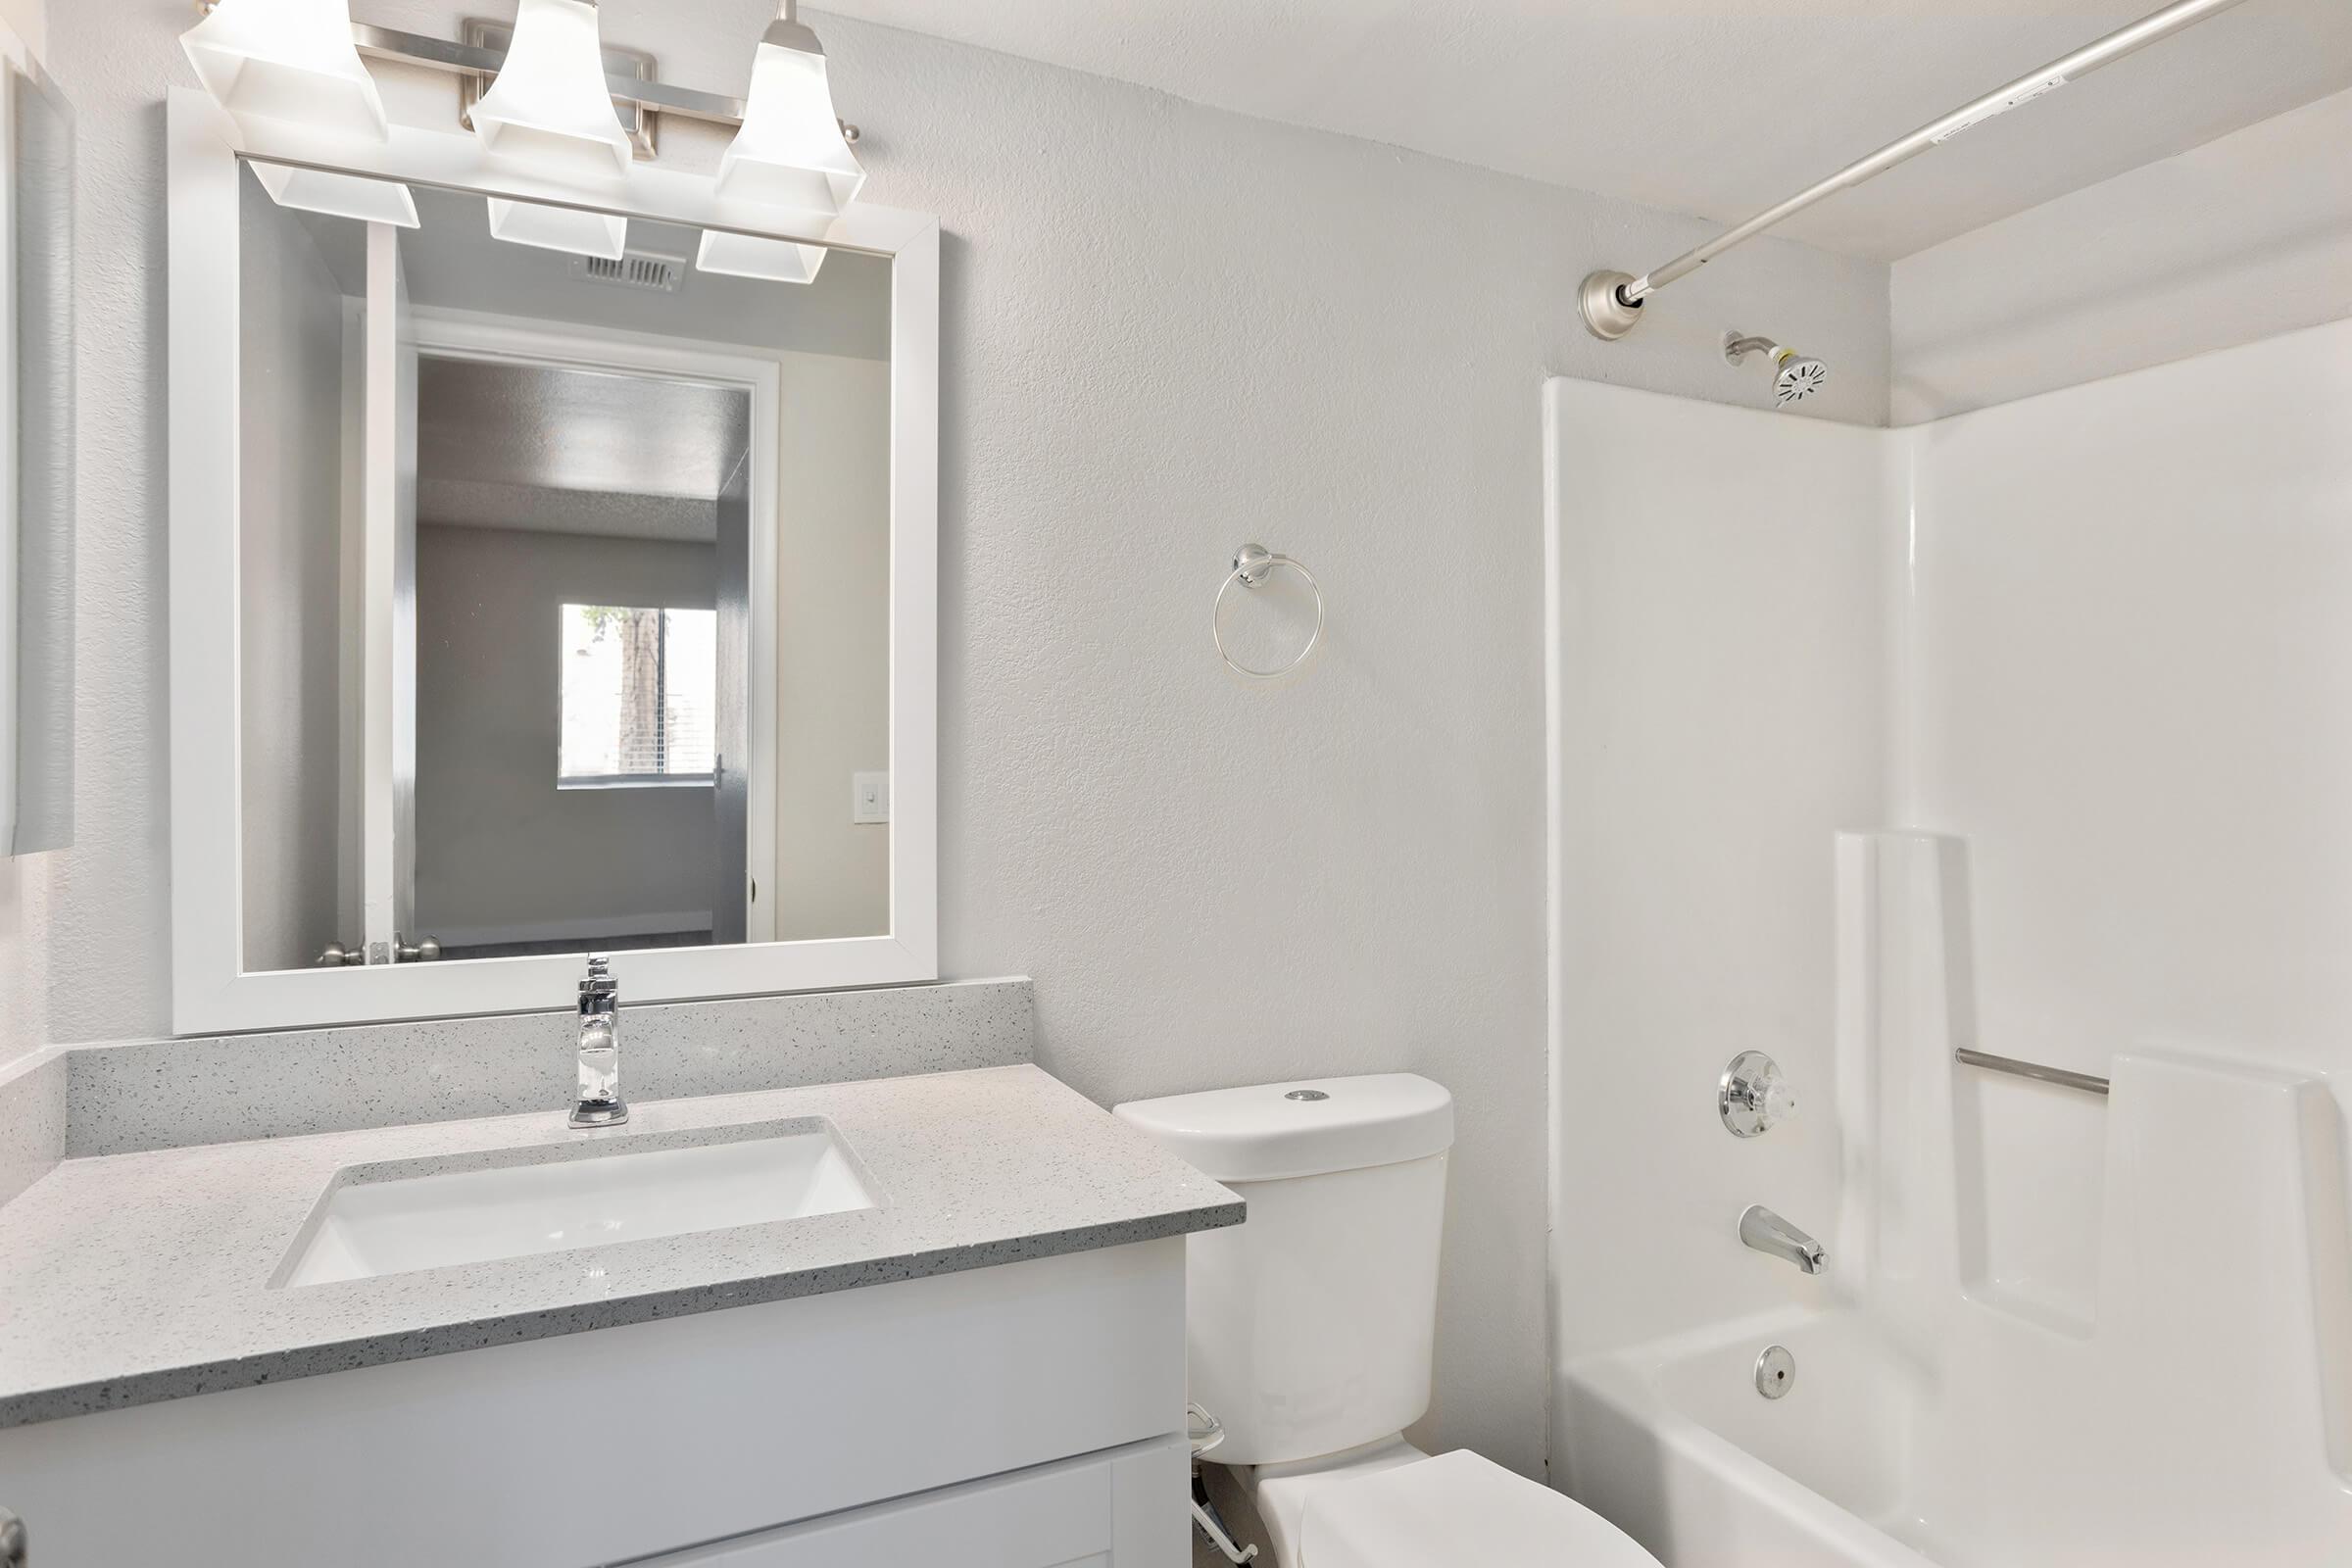 Fresh modern bathroom with mirrored sink vanity, a toilet, and a tub shower